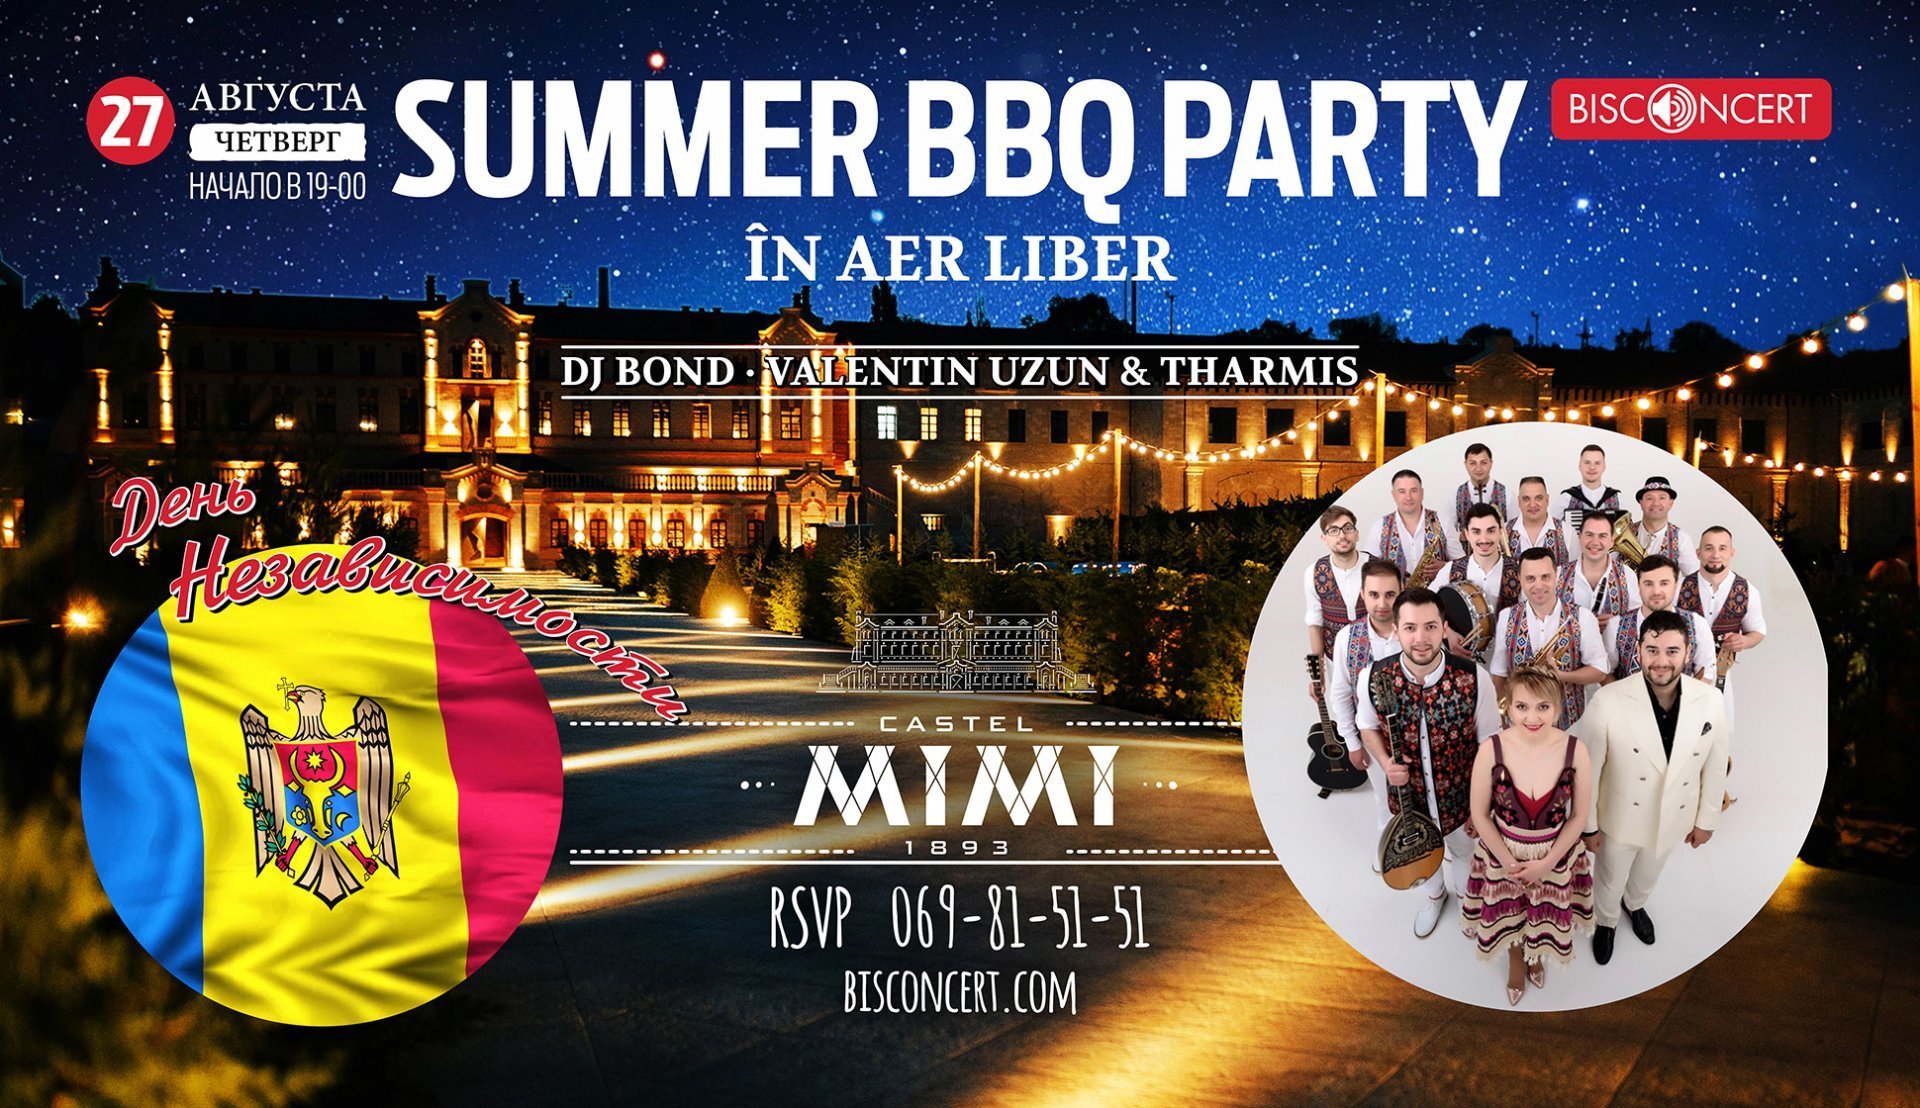 SUMMER BARBEQUE PARTY